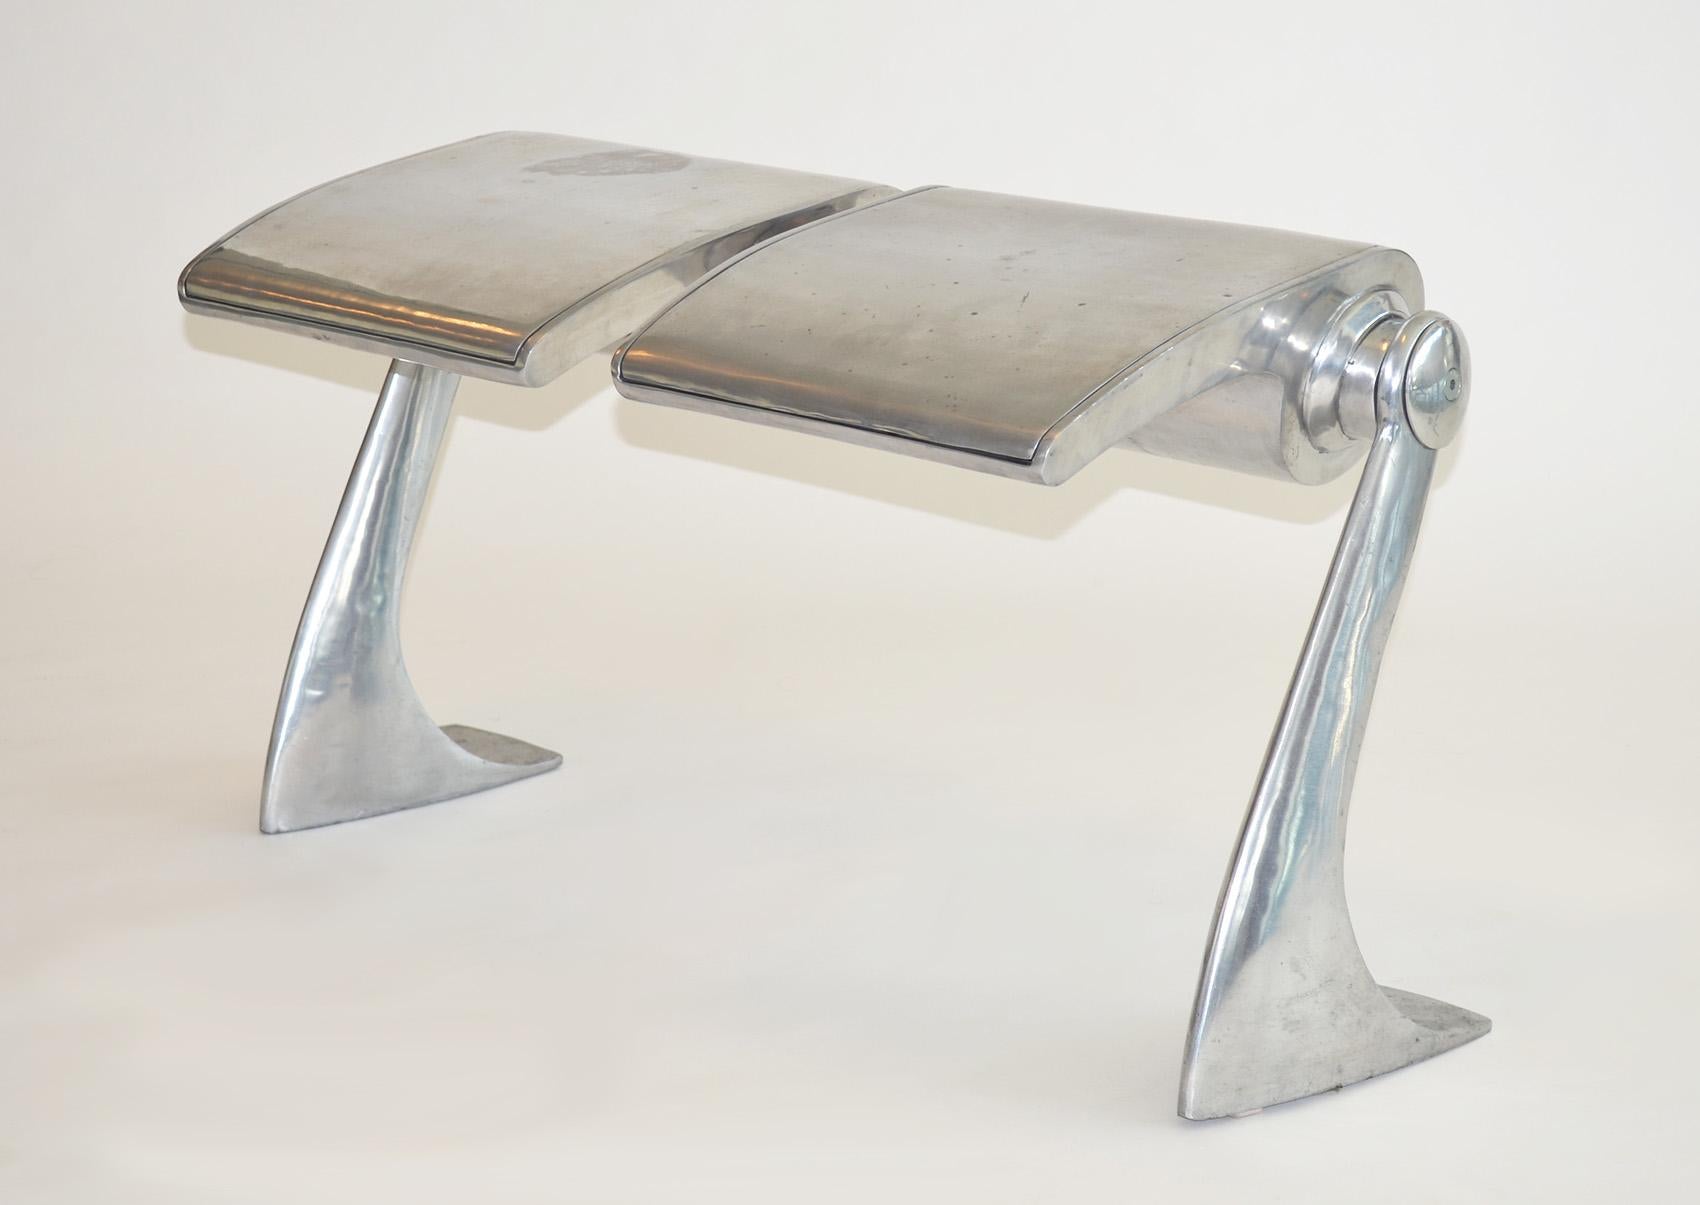 One-off bench stool or seat in polished aluminum industrial hadid style 90s.
Purchased late 1990's at ICFF, New York, NY. Sturdy polished aircraft aluminum two-seat construction reminiscent of public seating, perfect for bedroom, hall or as an